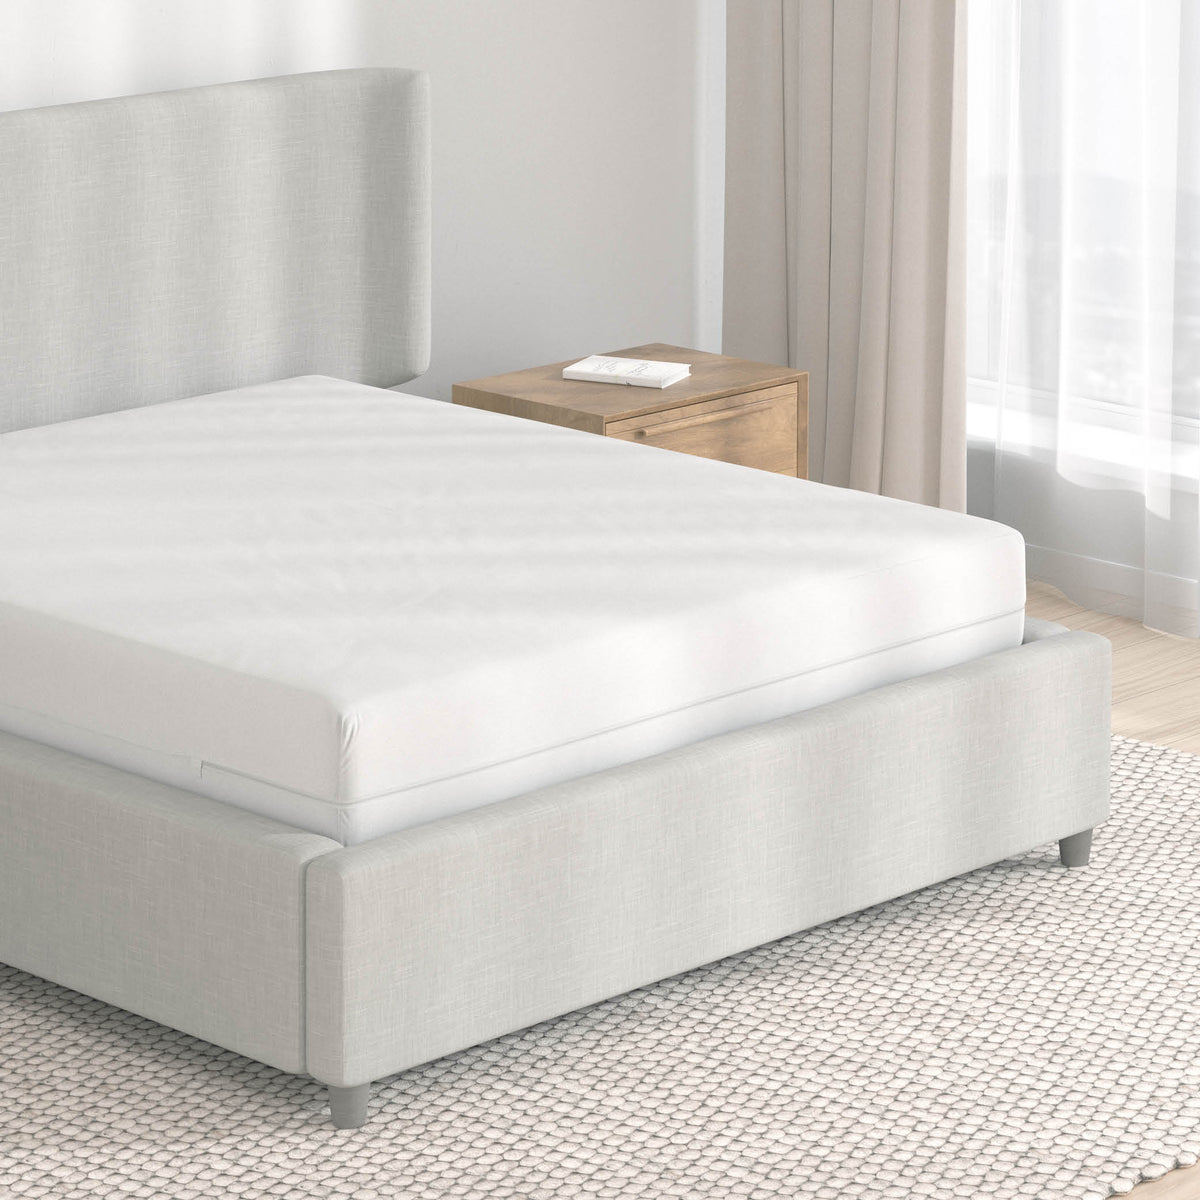 Image of a light, neutral-colored bedroom with just an encasement mattress protector on the bed